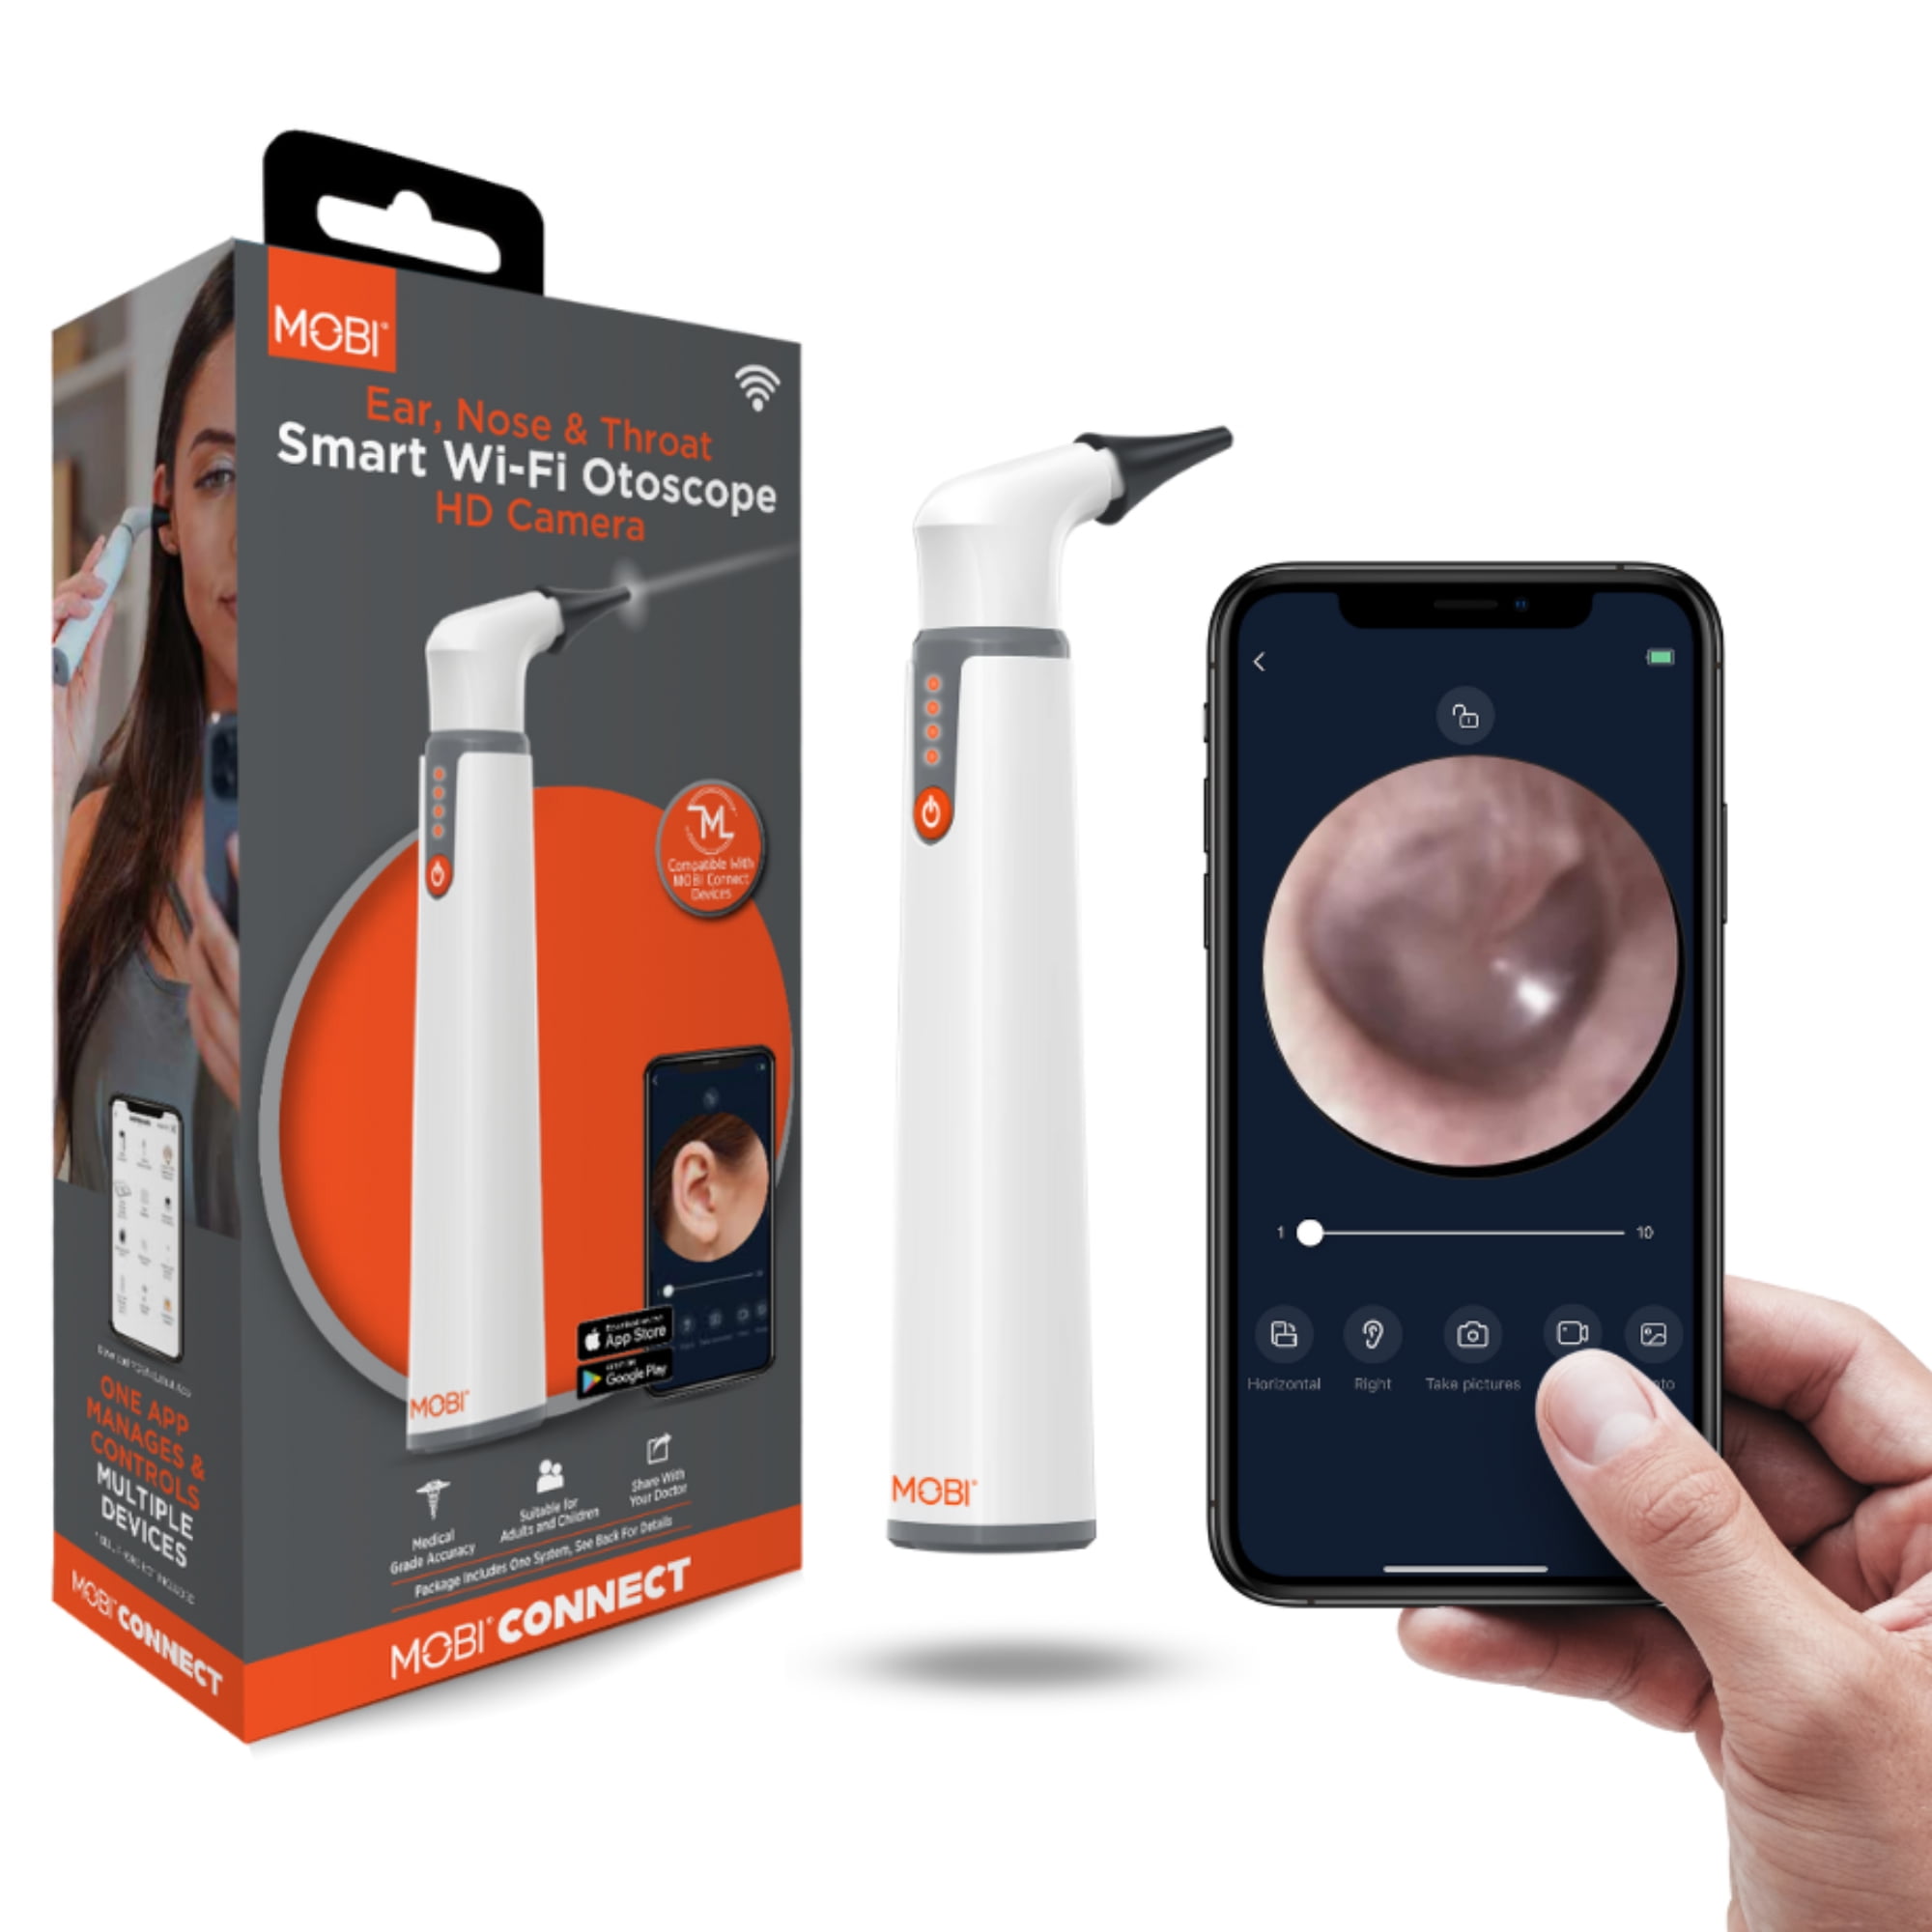 MOBI CONNECT Smart Wi-Fi Otoscope for Ears, Nose & Throat with HD Camera